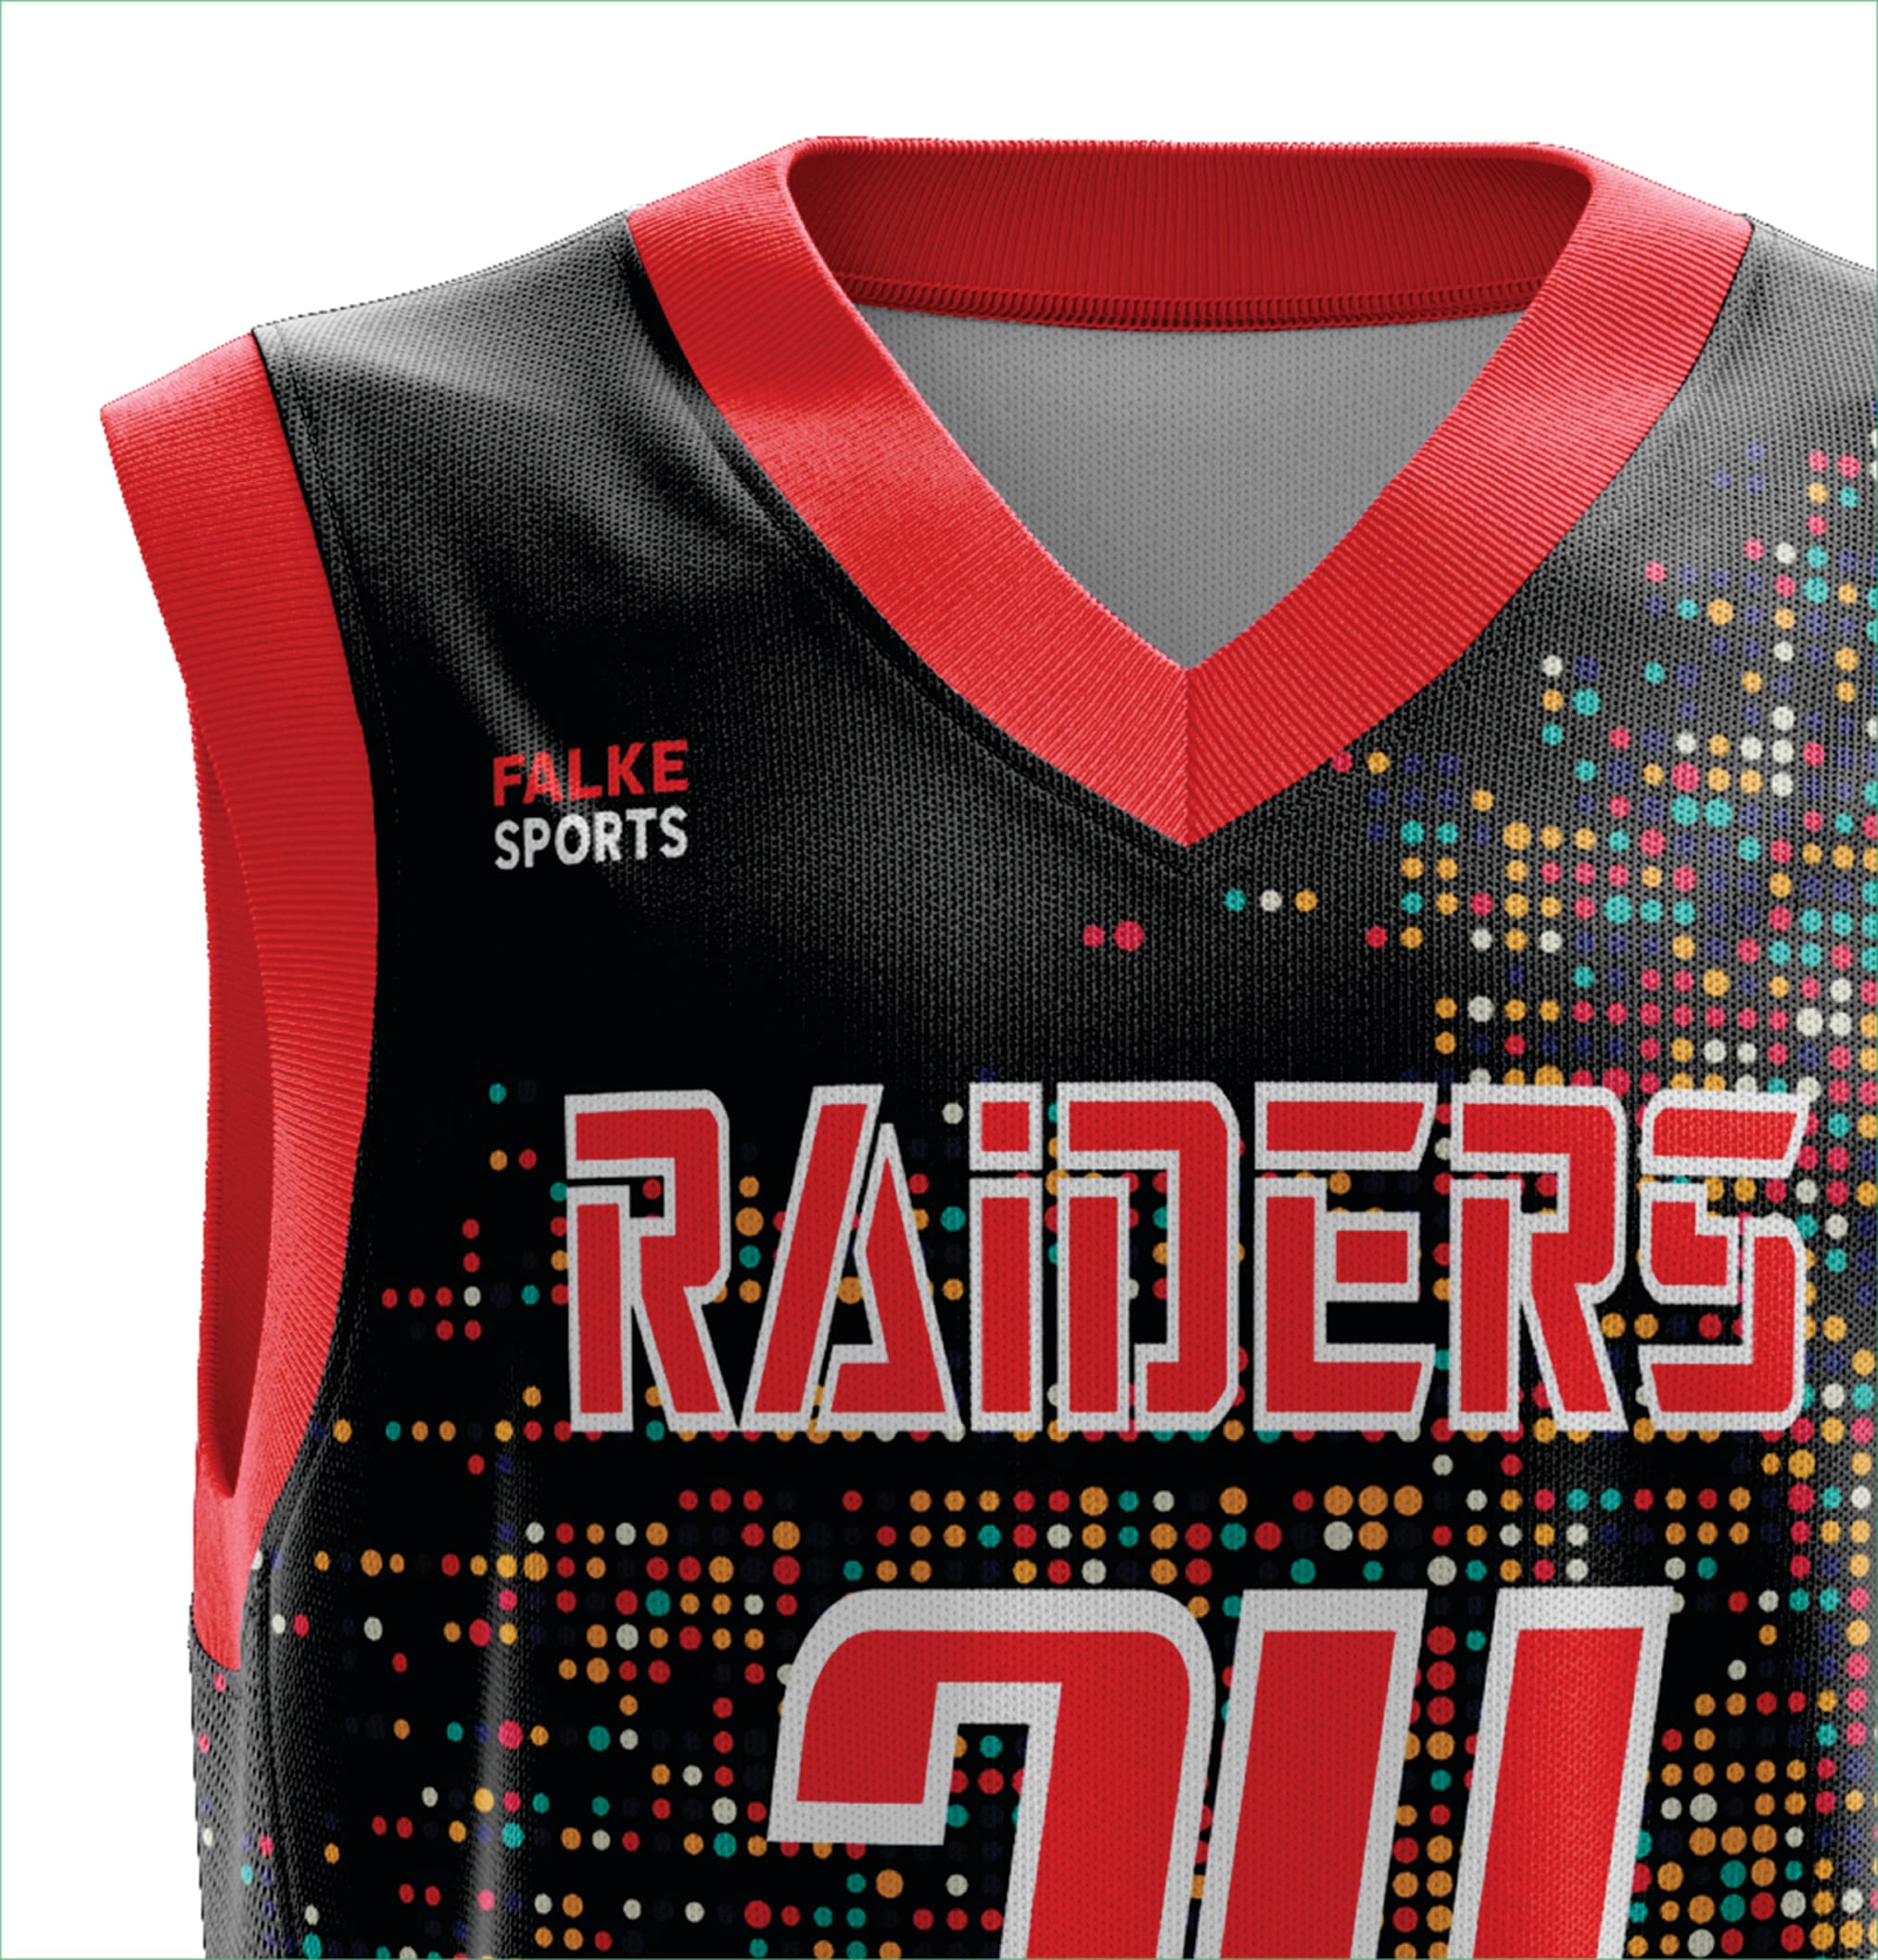 sublimation printing basketball jersey